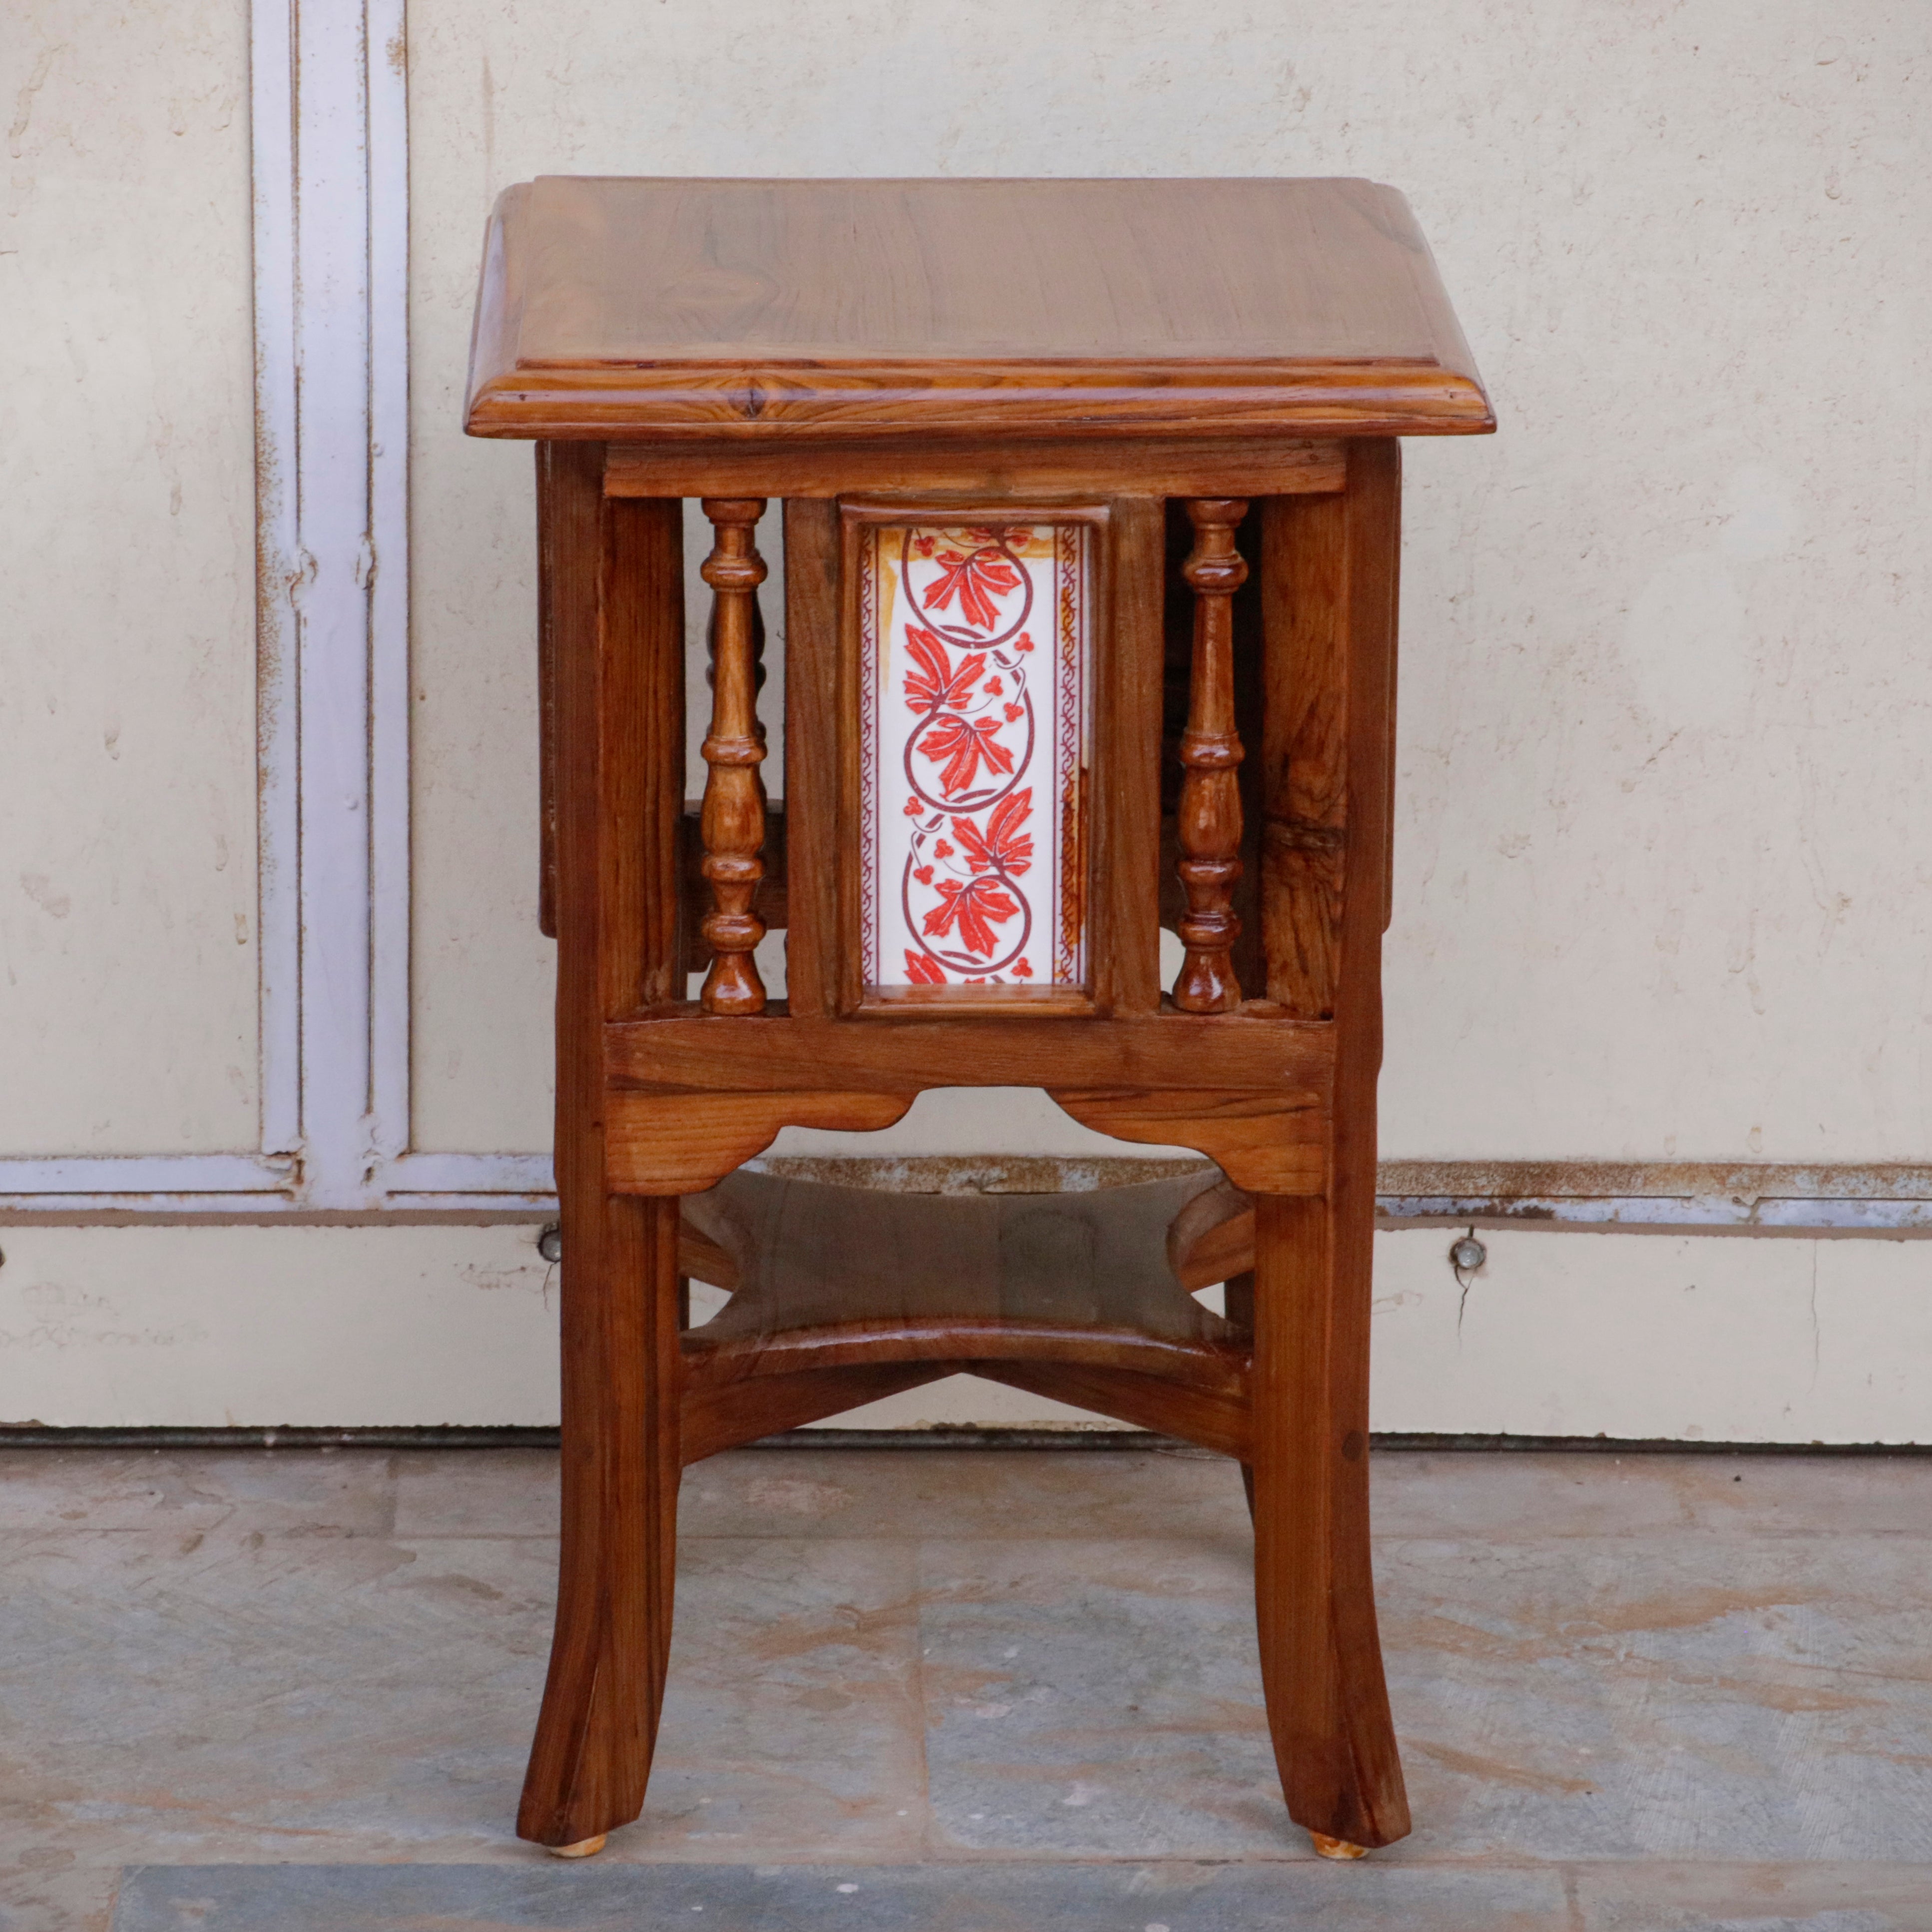 Classic Tiled End Table (11 x 11 x 18 Inch) End Table